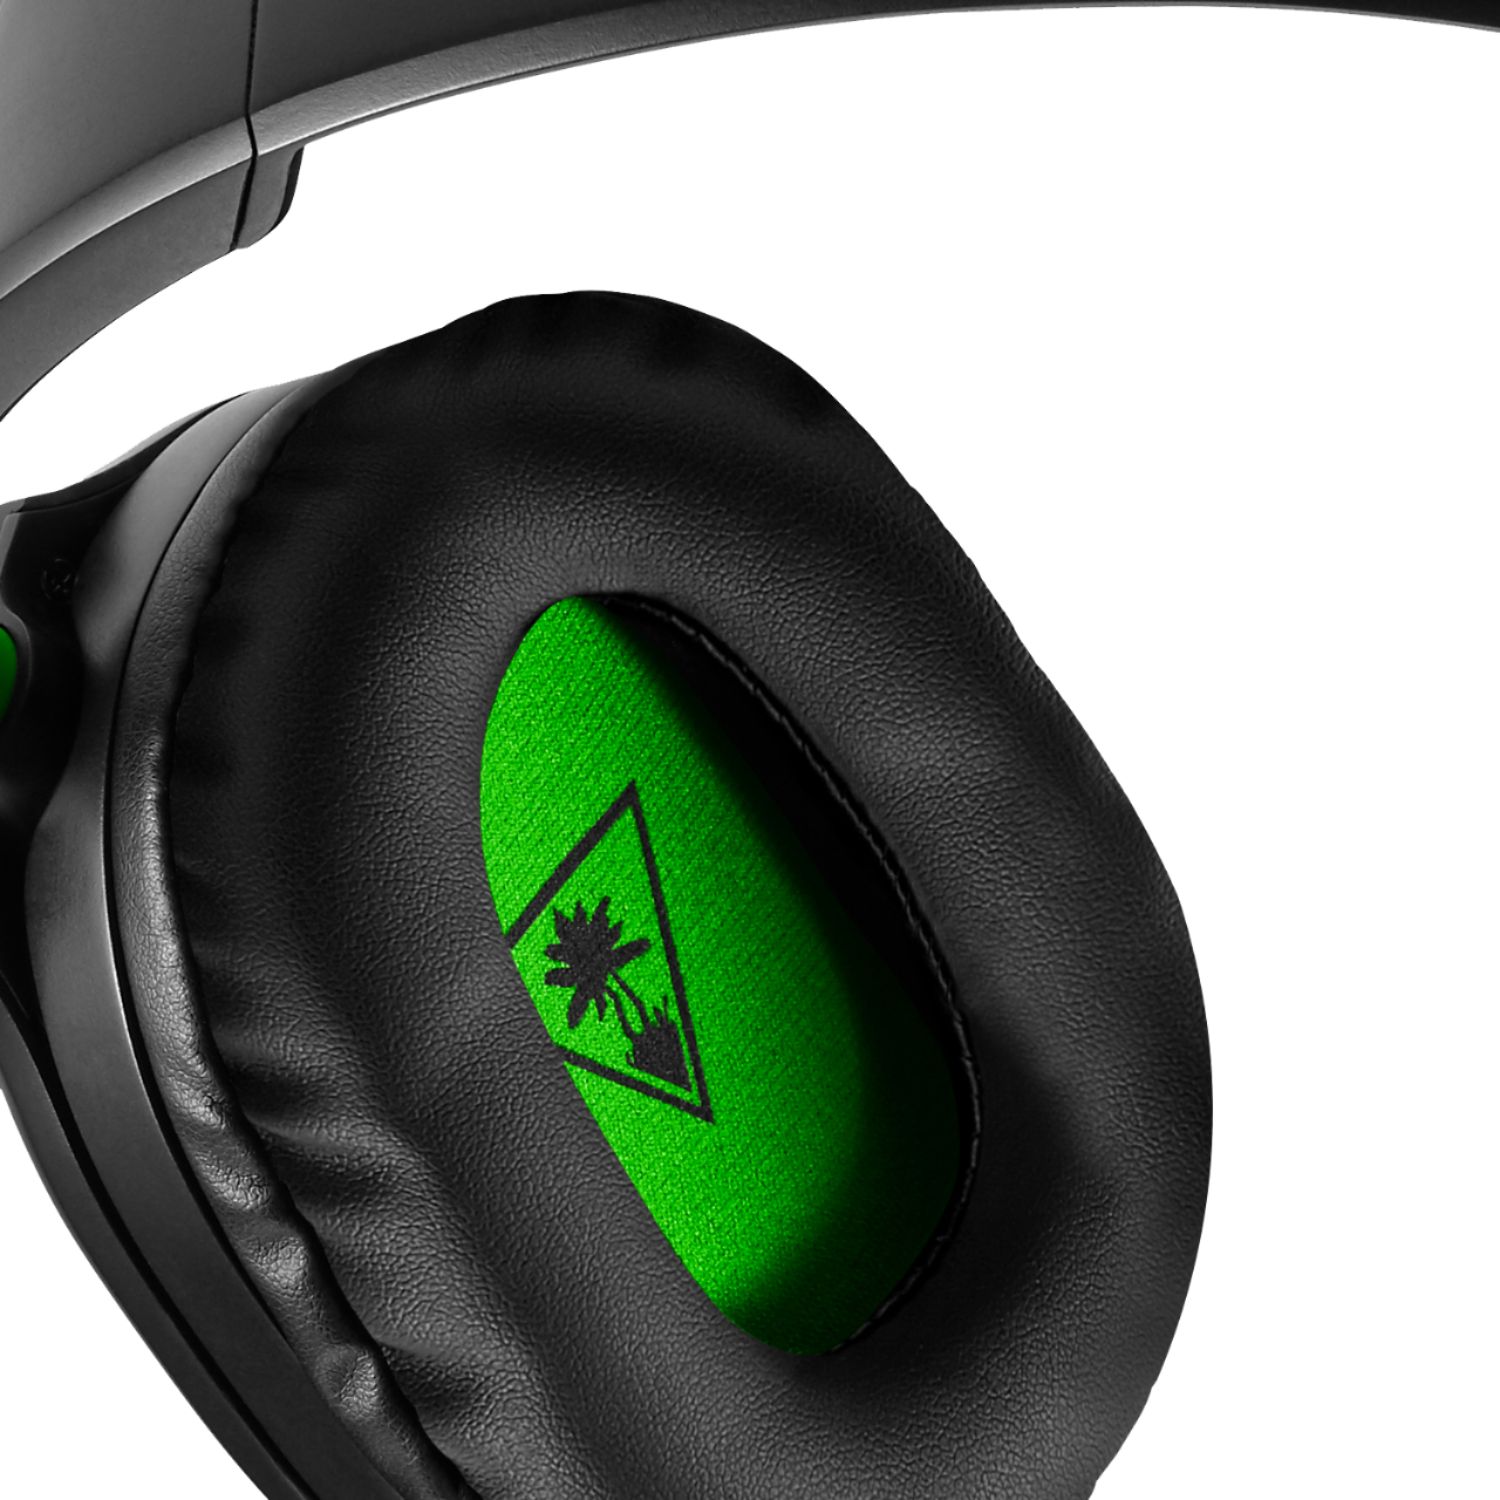 ear force recon 70 xbox one